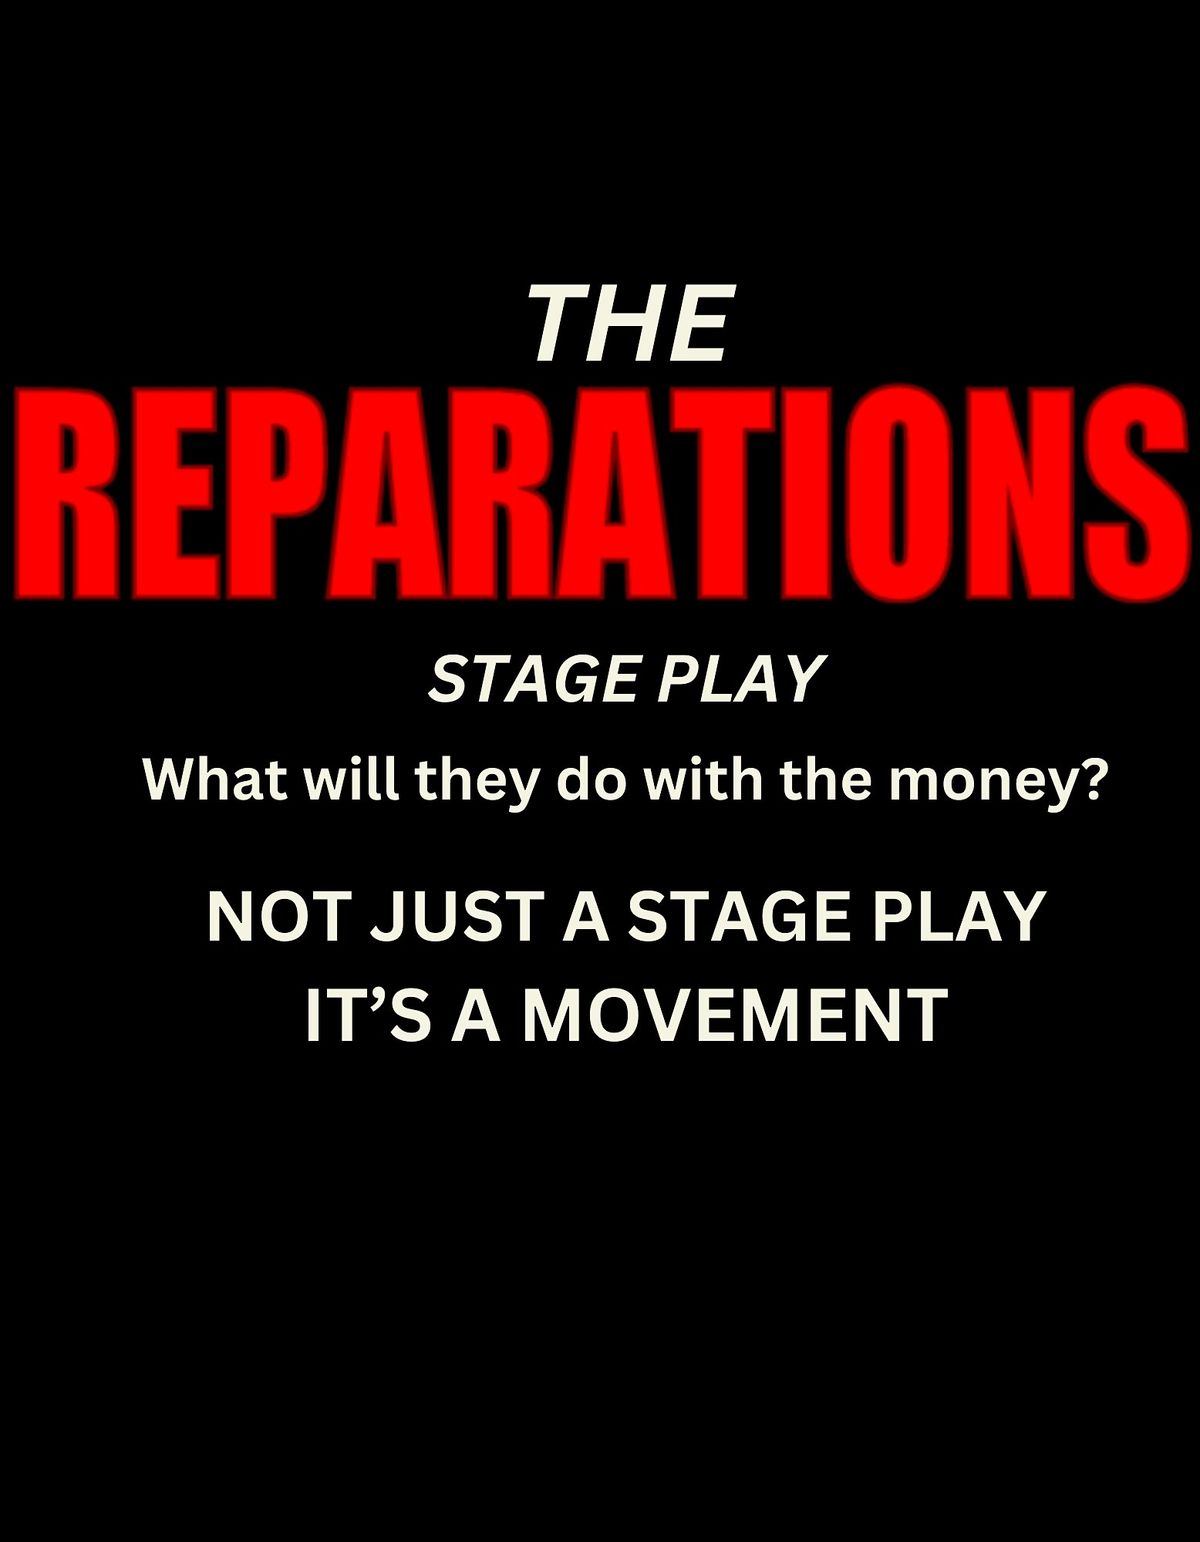 THE REPARATIONS STAGE PLAY: WHAT WILL THEY DO WITH THE MONEY?